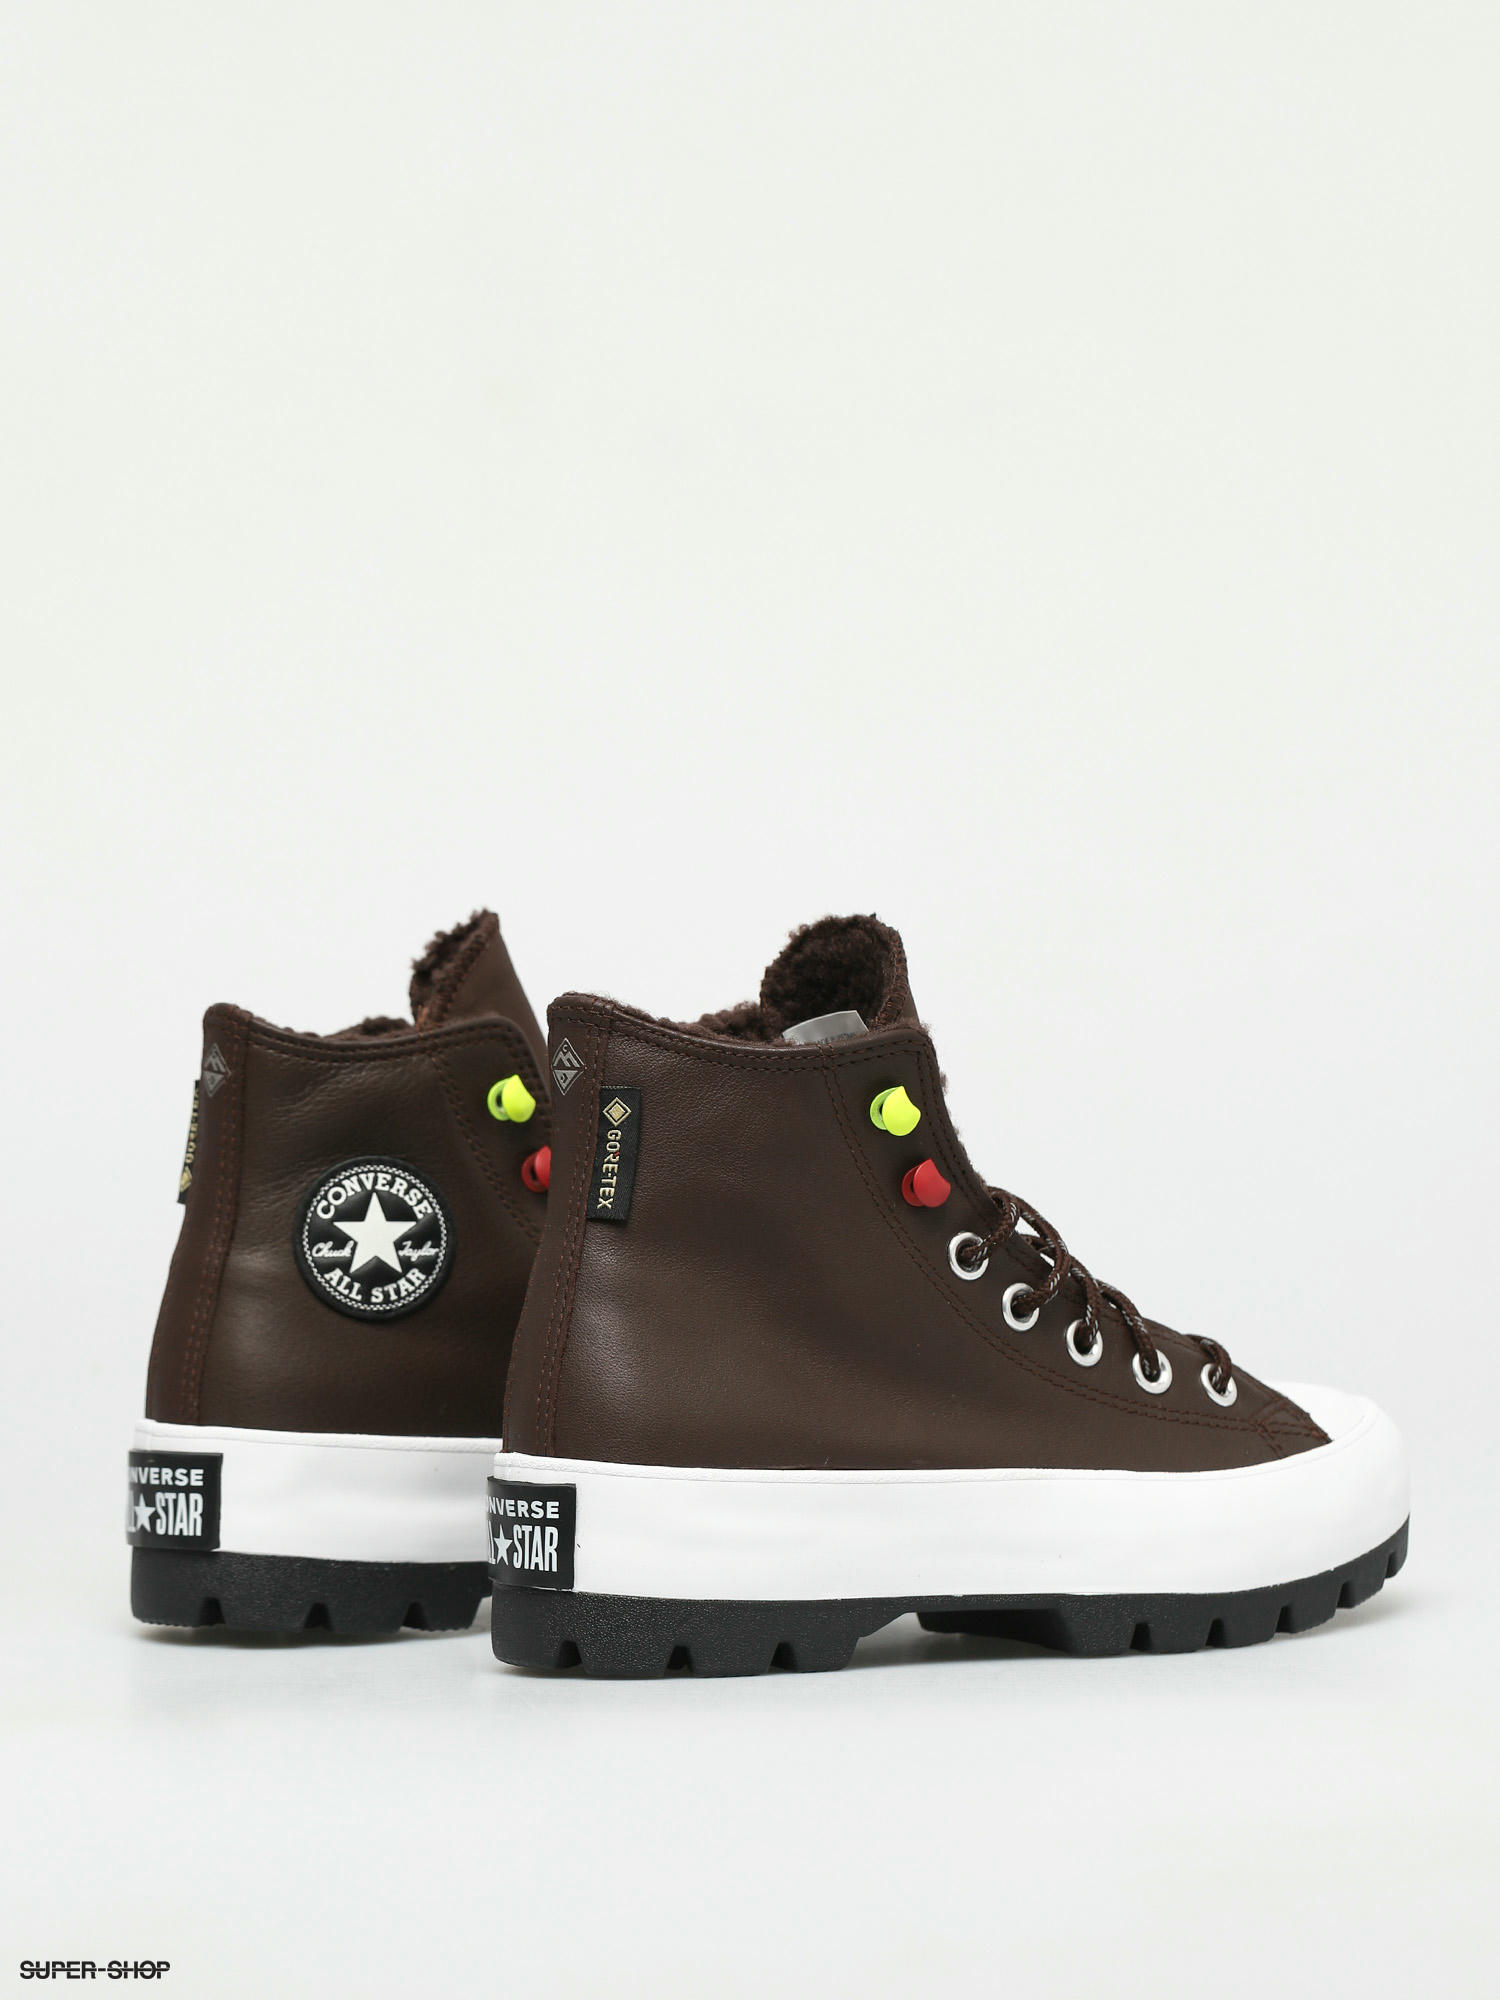 converse leather winter shoes